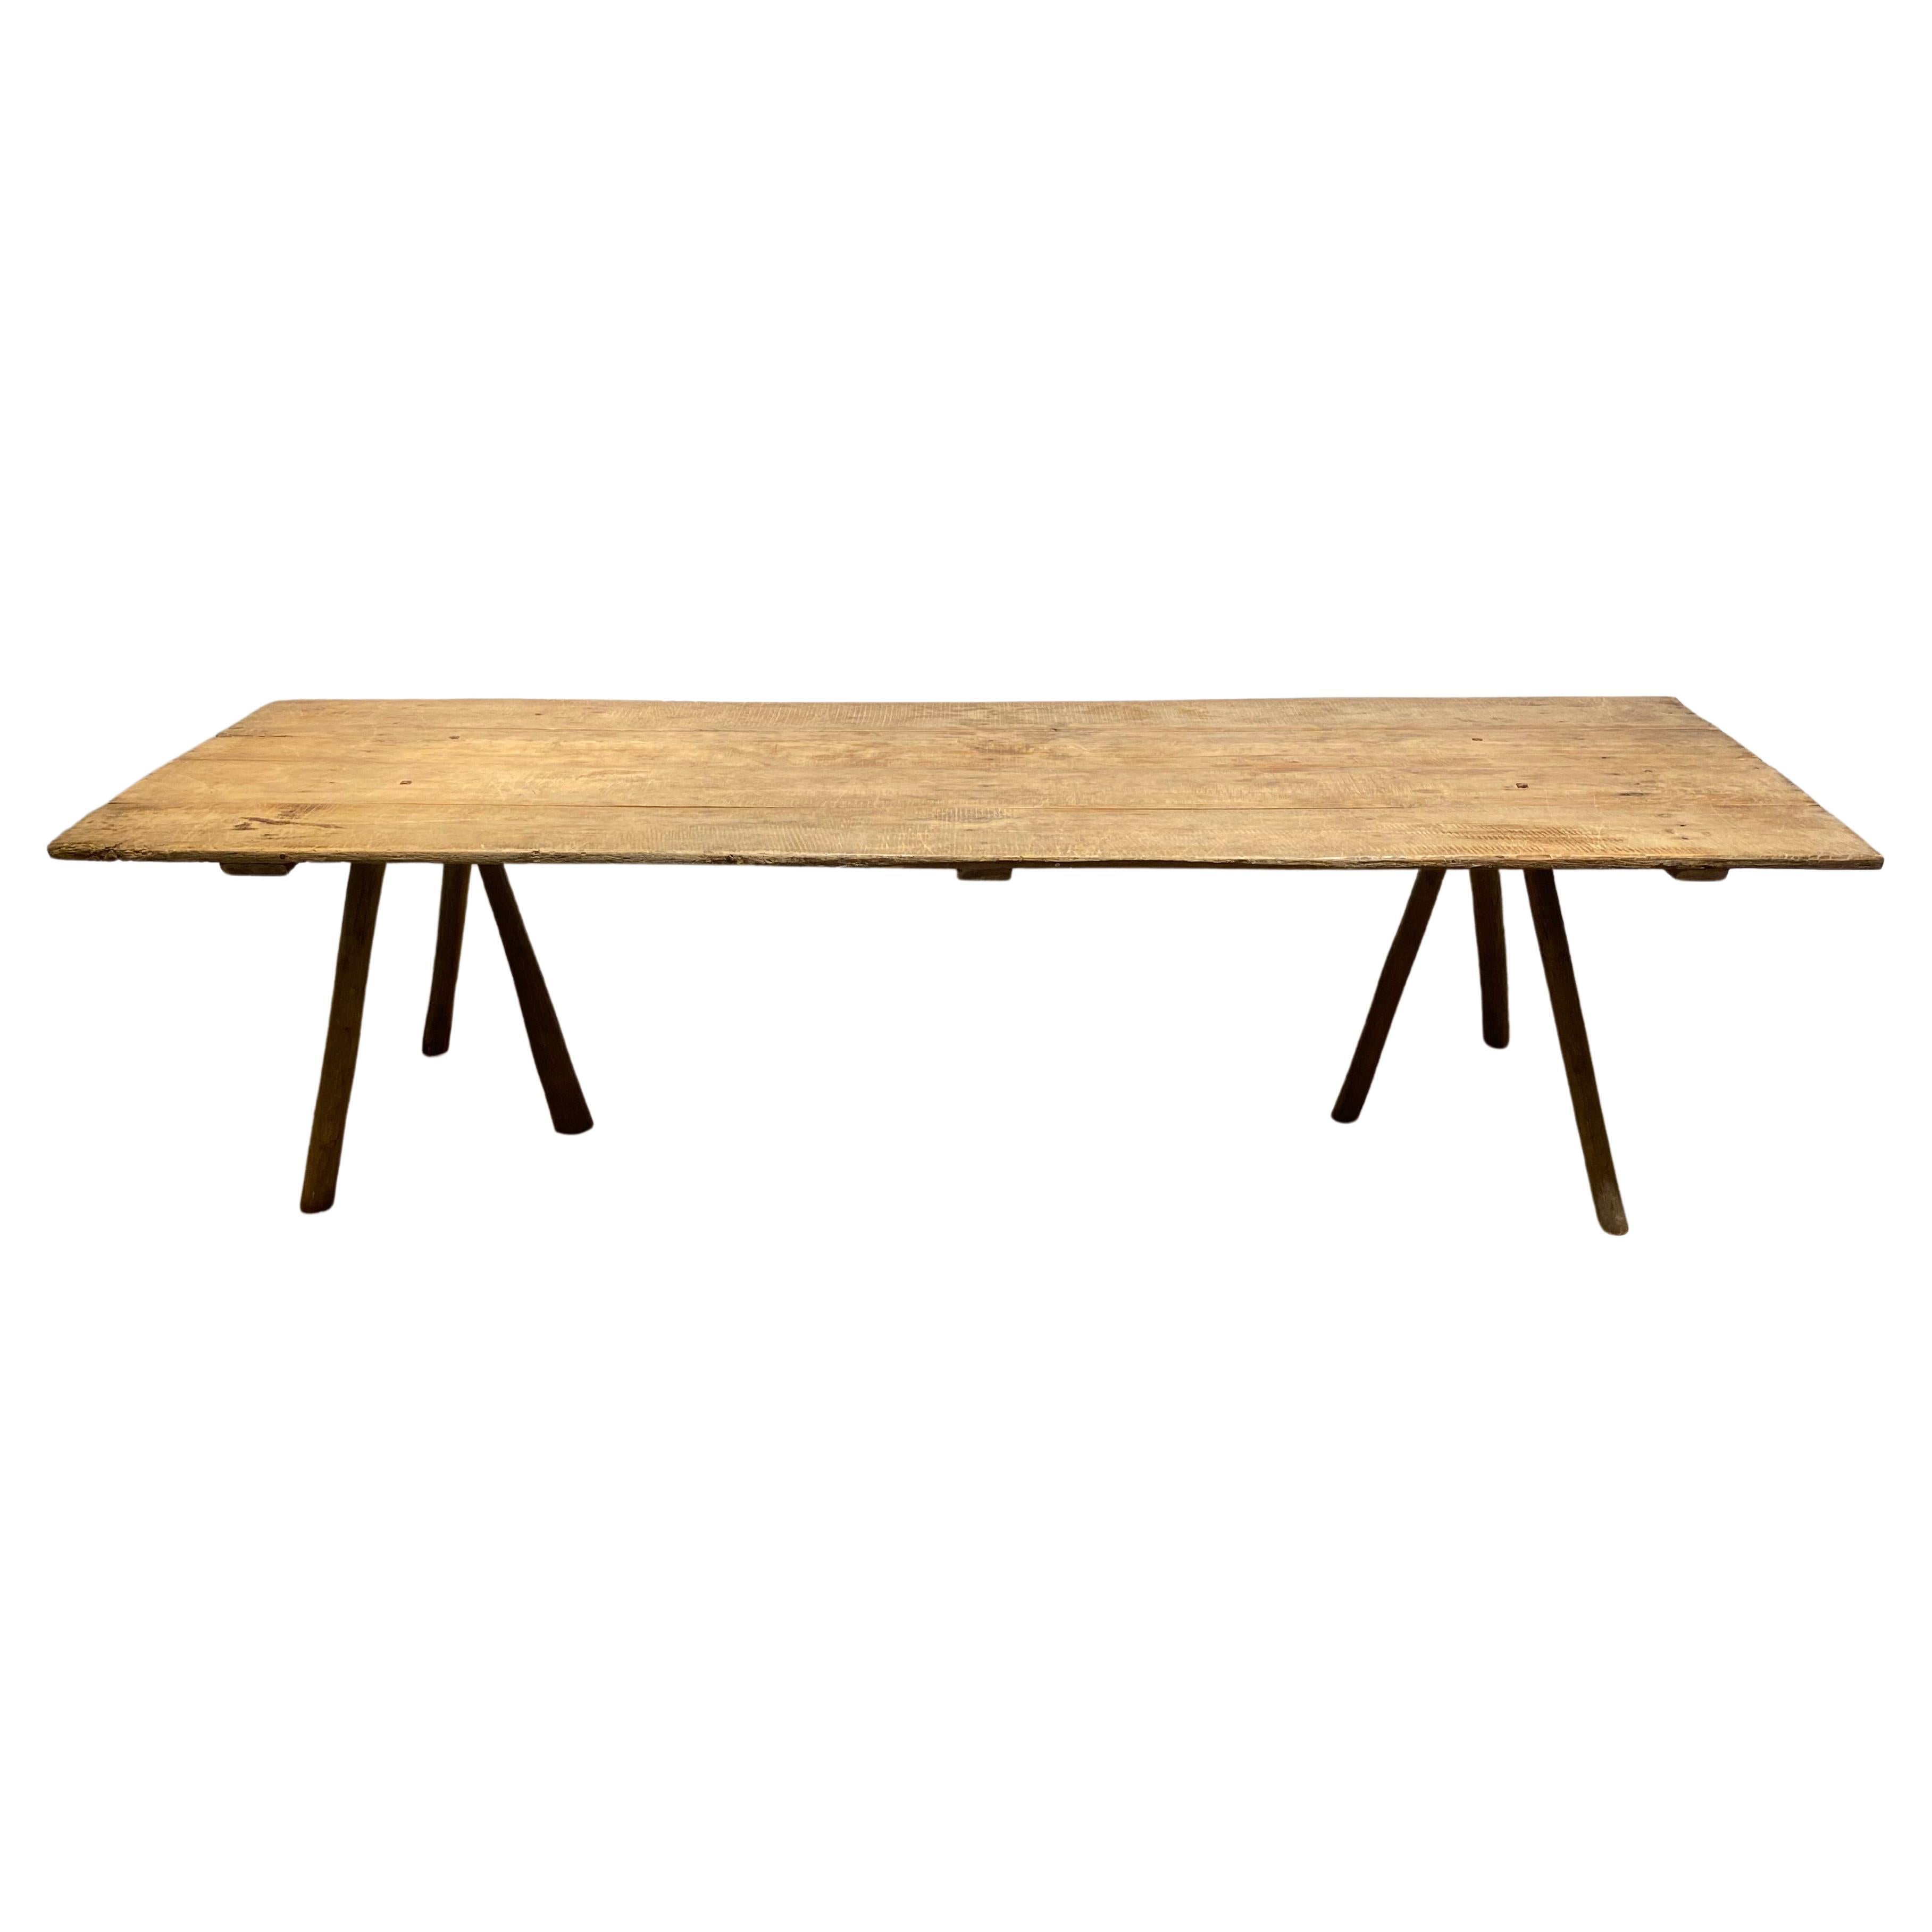 French Vigneron Table in a Bleached Wood For Sale